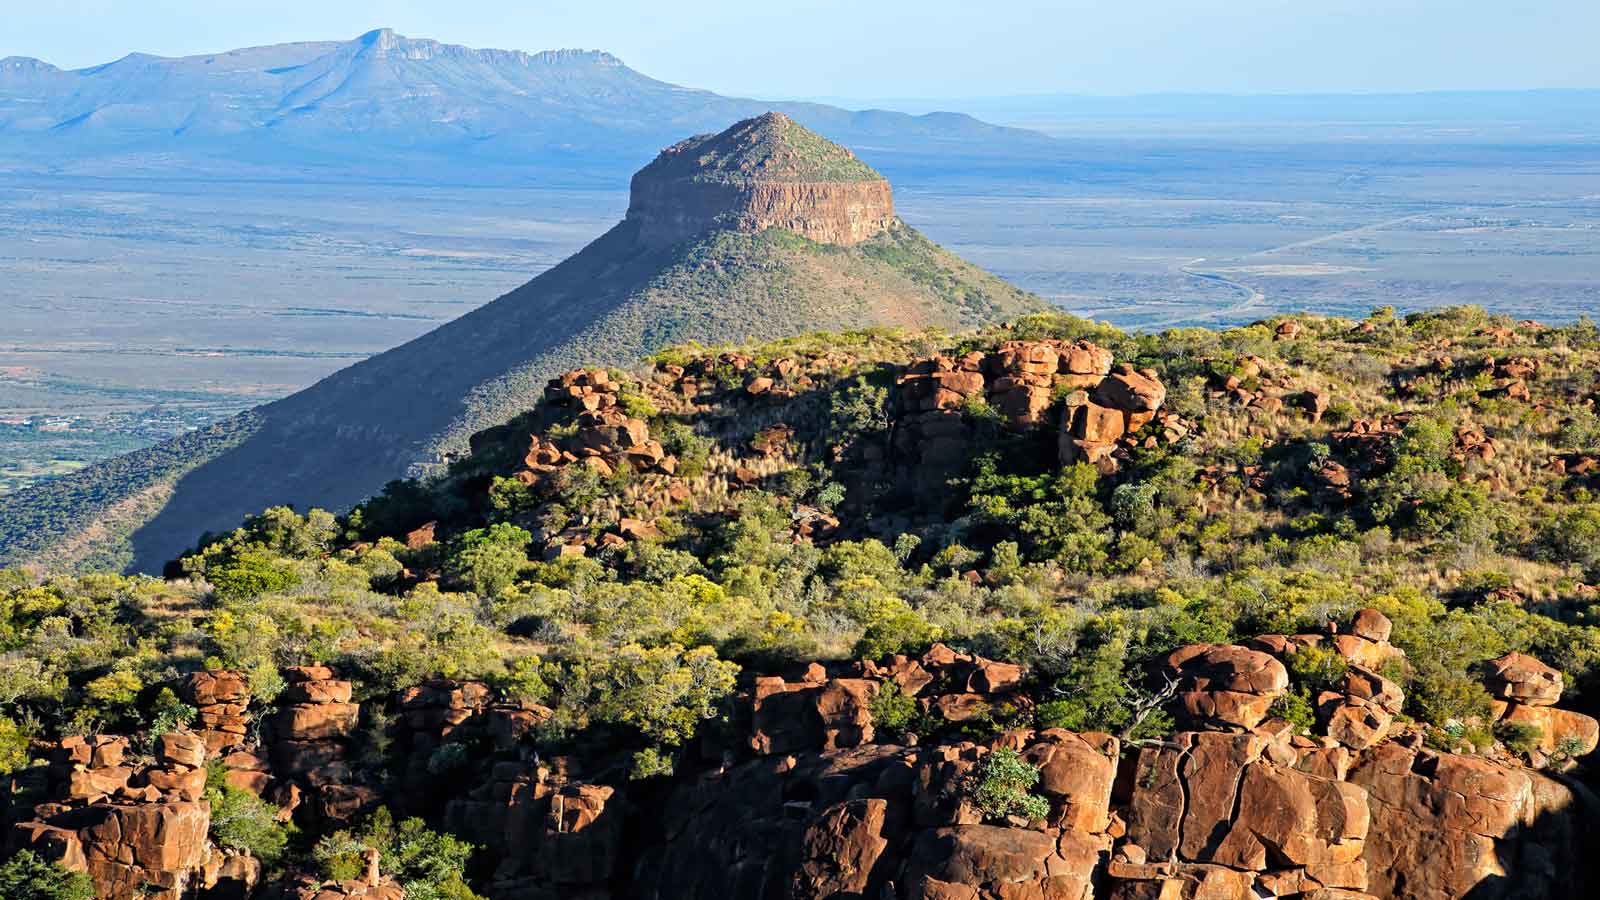 <p>The Valley of Desolation is not on many people’s radars, locals or tourists, but it should be. Just outside one of South Africa’s oldest towns is the <a href="https://www.sanparks.org/parks/camdeboo" rel="nofollow noopener">Camdeboo National Park</a>, a beautiful wildlife reserve with hiking trails, picnic sites, and the Valley of Desolation. The valley has dramatic rock formations that reach 394 feet from the valley floor.</p>